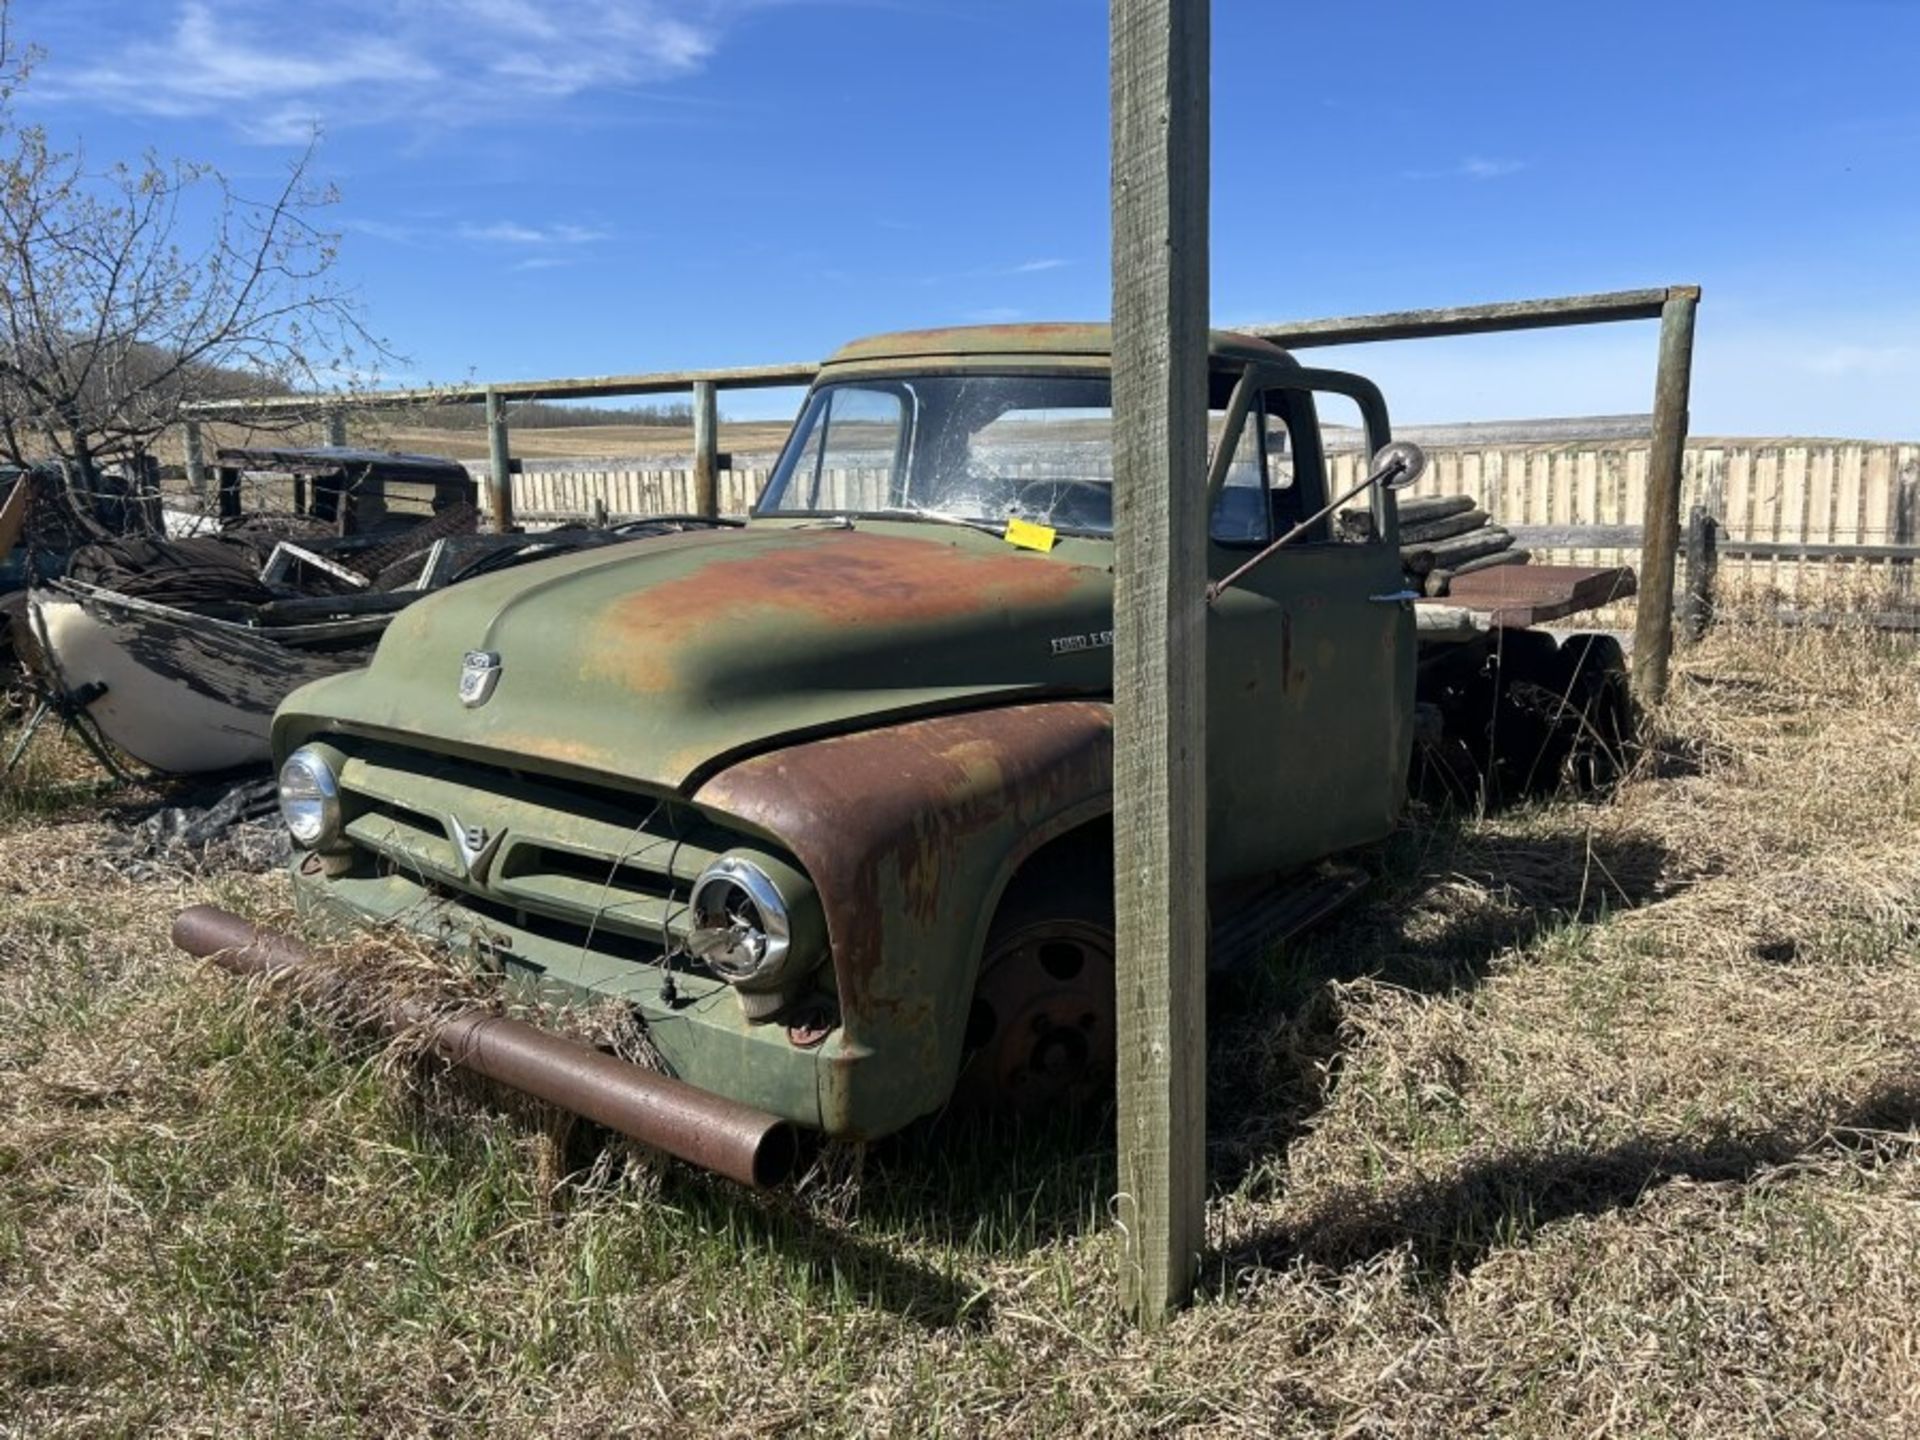 1956 FORD F600 CAB & CHASSIS W/STD TRANS, V8 ENG. (PROJECT) - LOCATED 22 KM EAST OF PONOKA